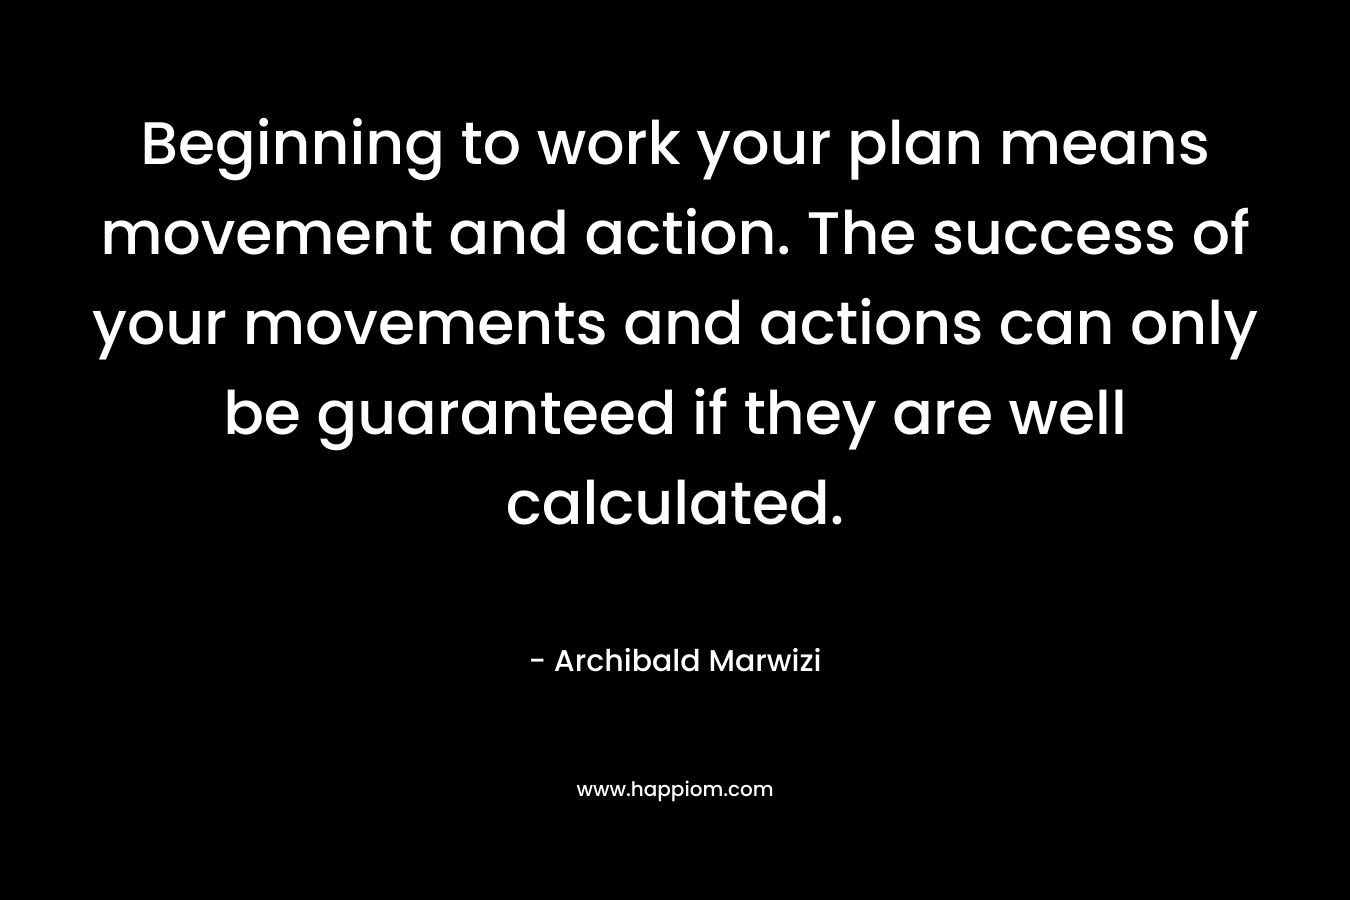 Beginning to work your plan means movement and action. The success of your movements and actions can only be guaranteed if they are well calculated. – Archibald Marwizi